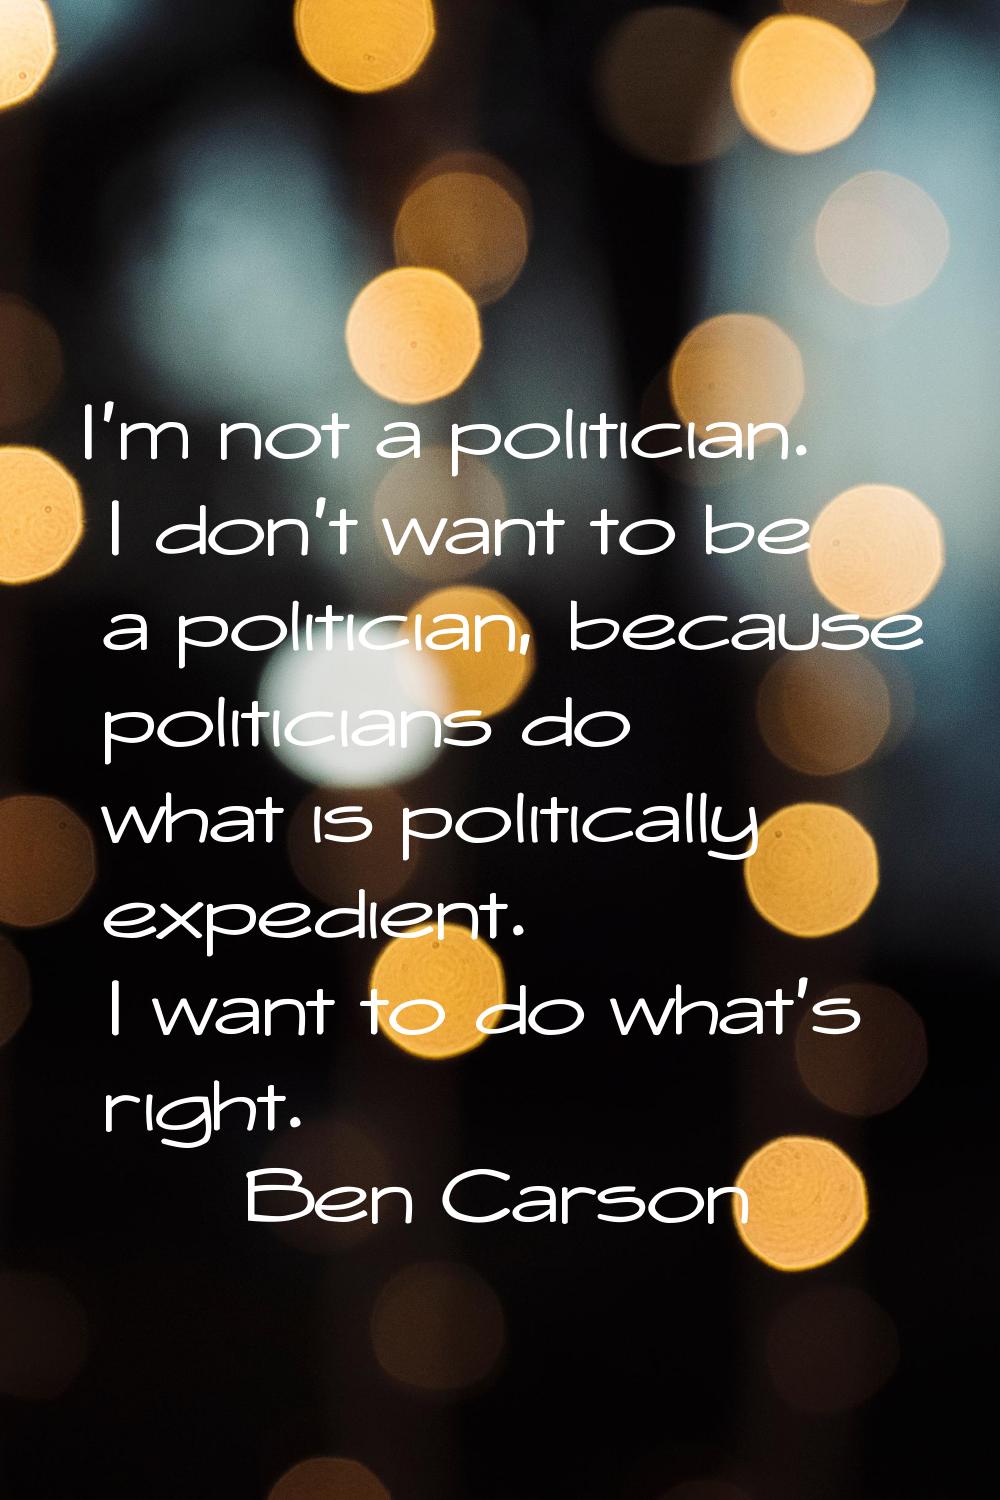 I'm not a politician. I don't want to be a politician, because politicians do what is politically e